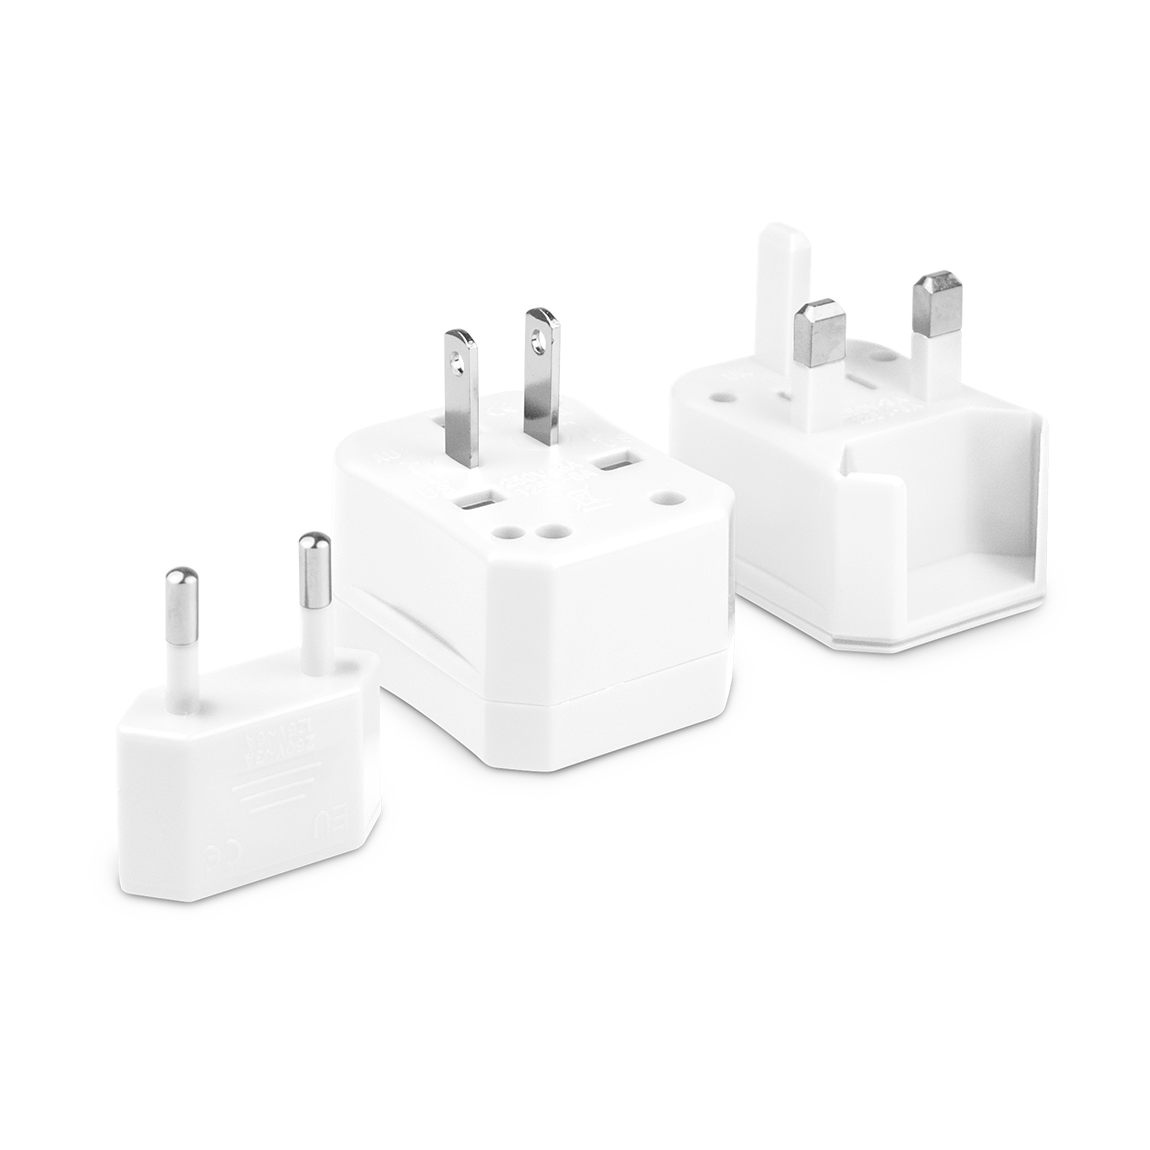 Three pieces of the universal travel adapter. This travel plug adapter is White. The World Traveler Travel Adapter is the perfect compact travel adapter to charge your tech on-the-go.